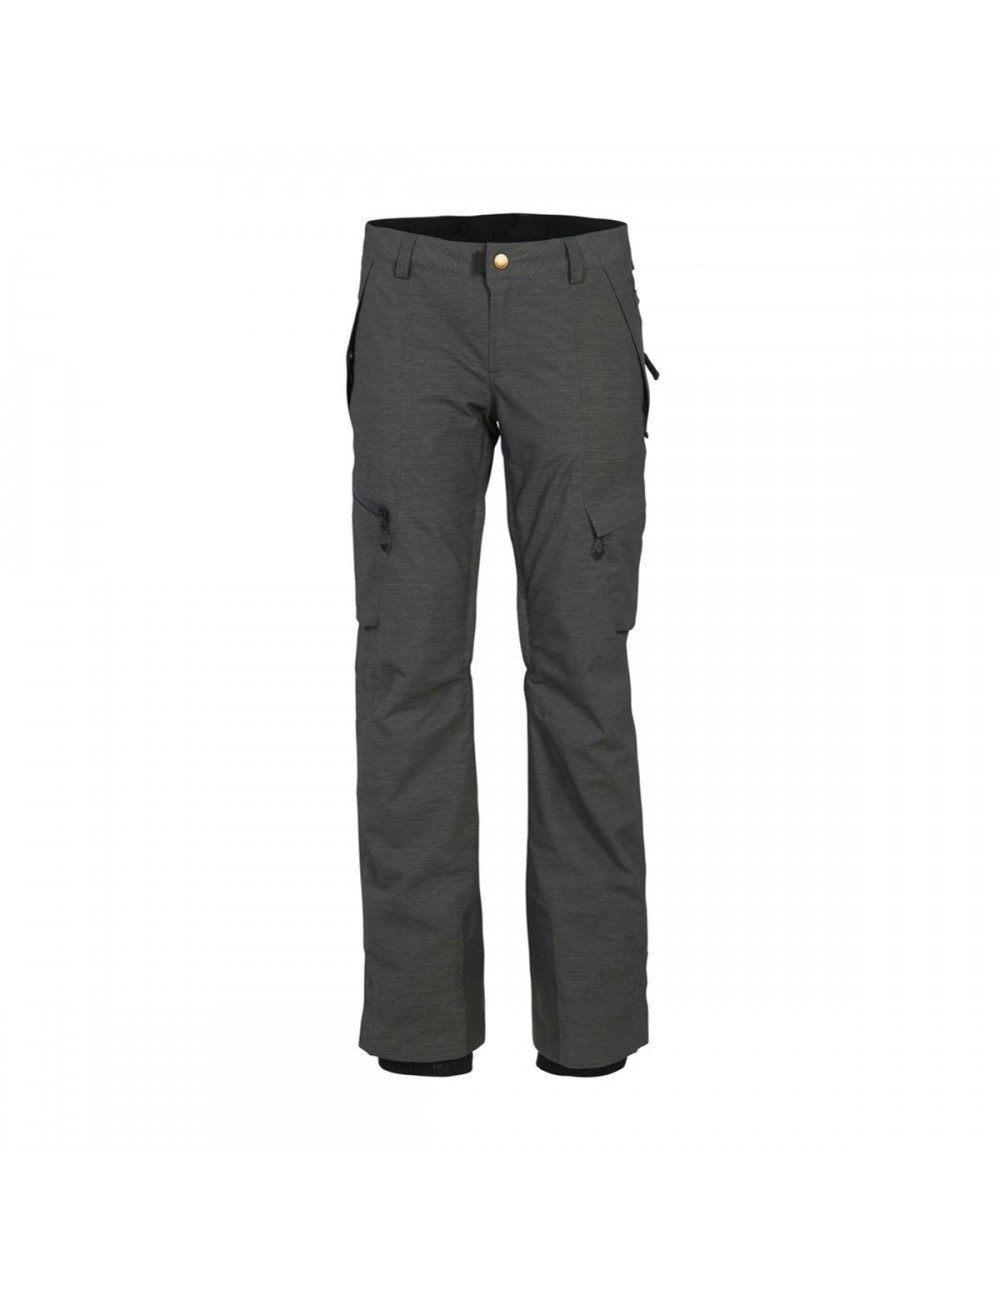 686 Wms Geode Pant - Charcoal Heather